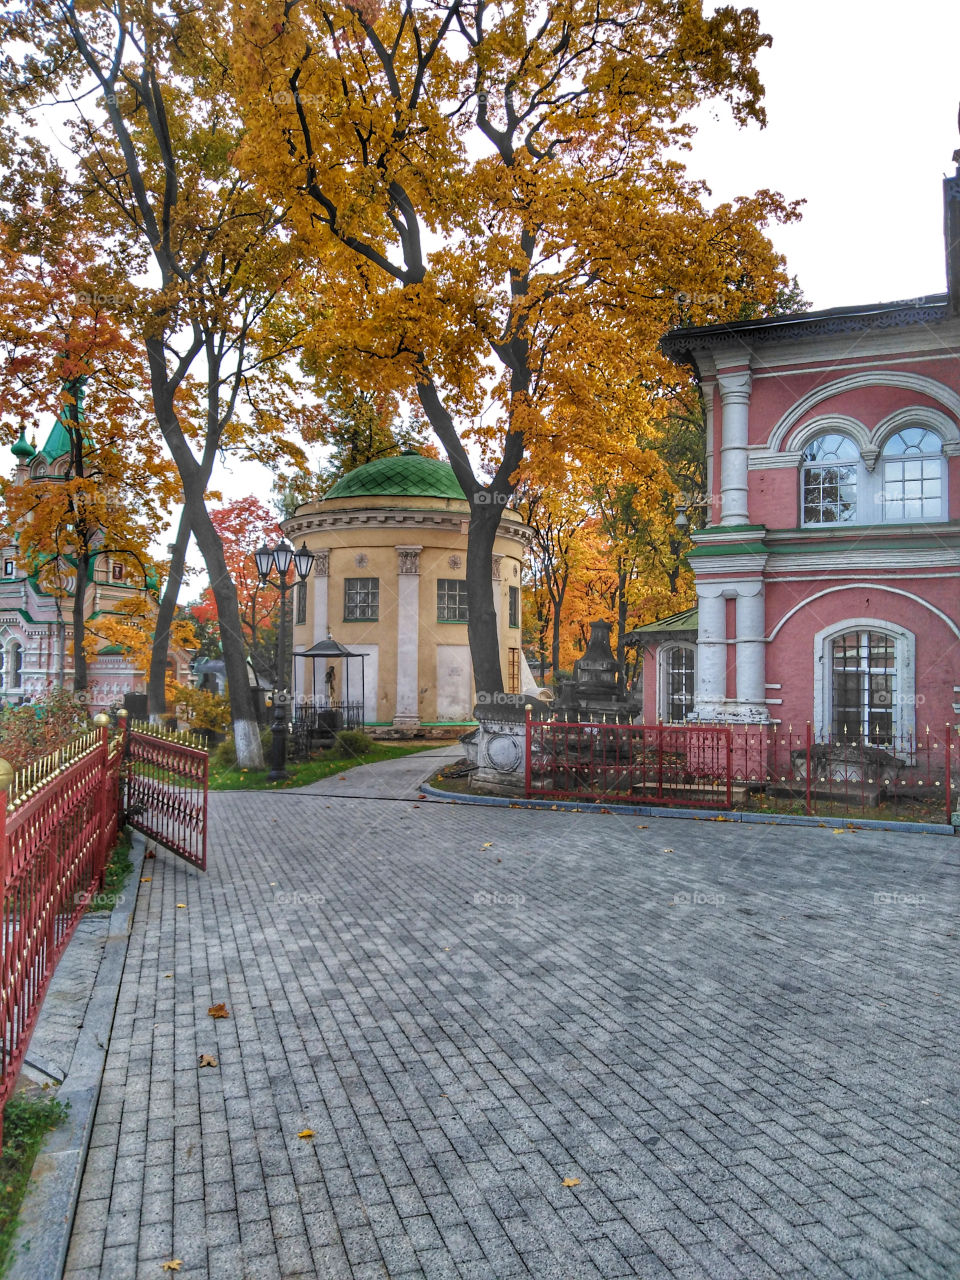 Autumn in the Donskoy Monastery